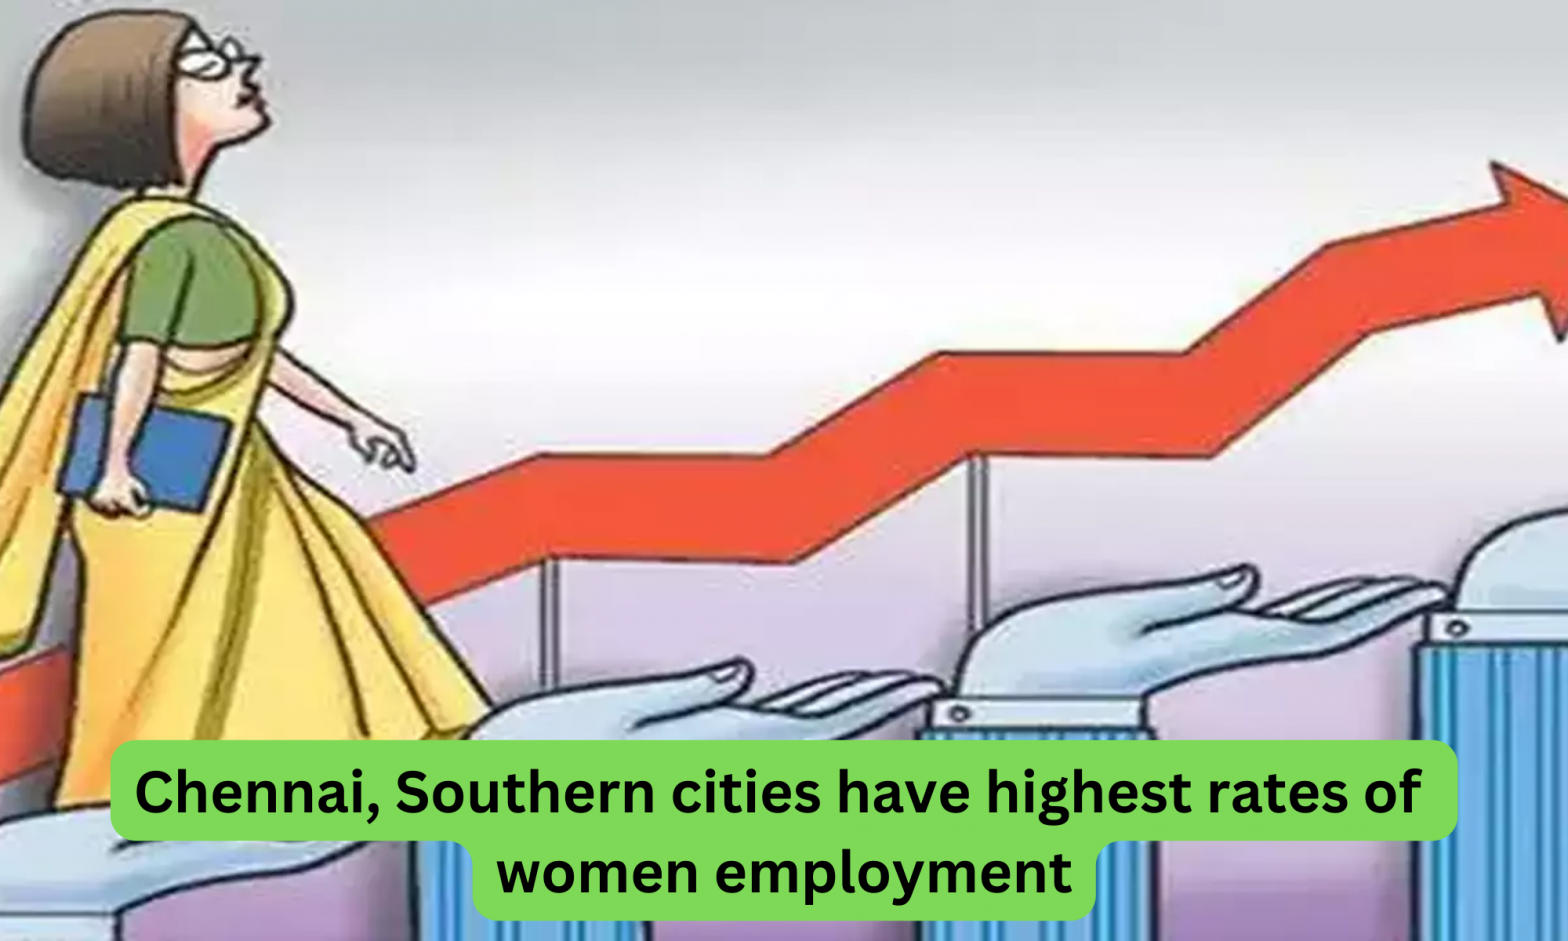 Chennai, Southern cities have highest rates of women employment